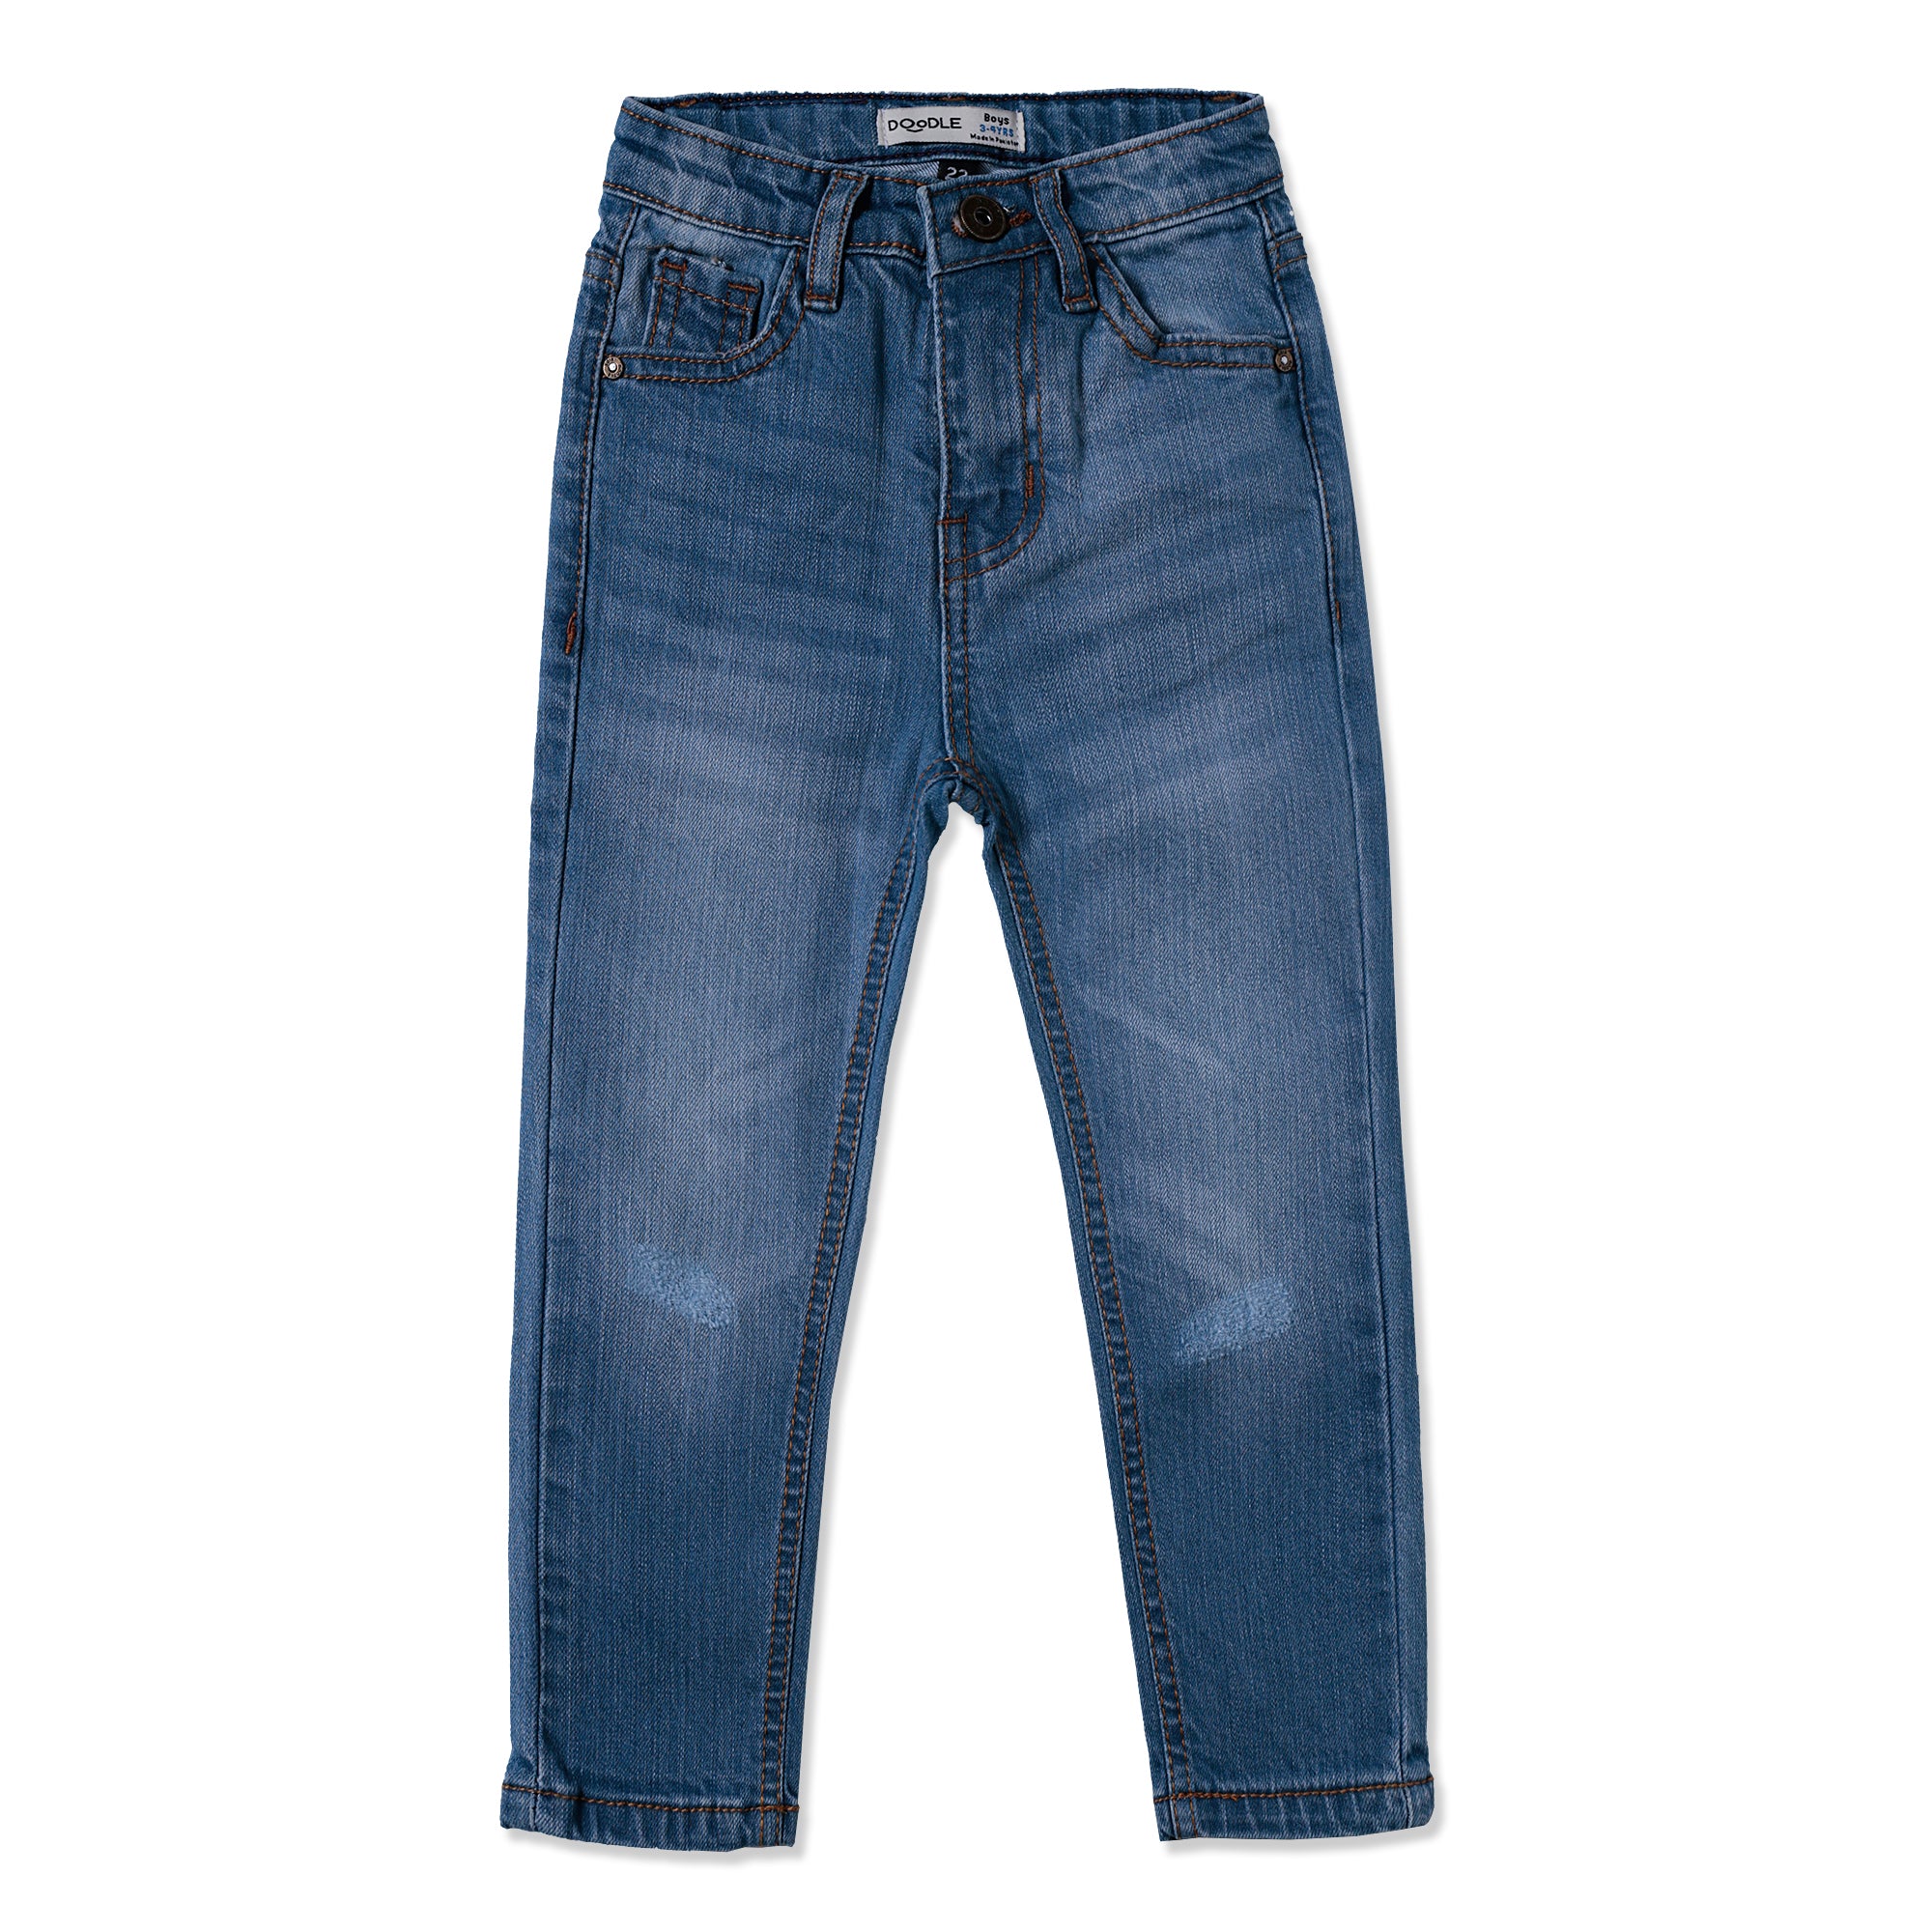 BOYS JEANS EMB SPIDERMAN-005066-NVY